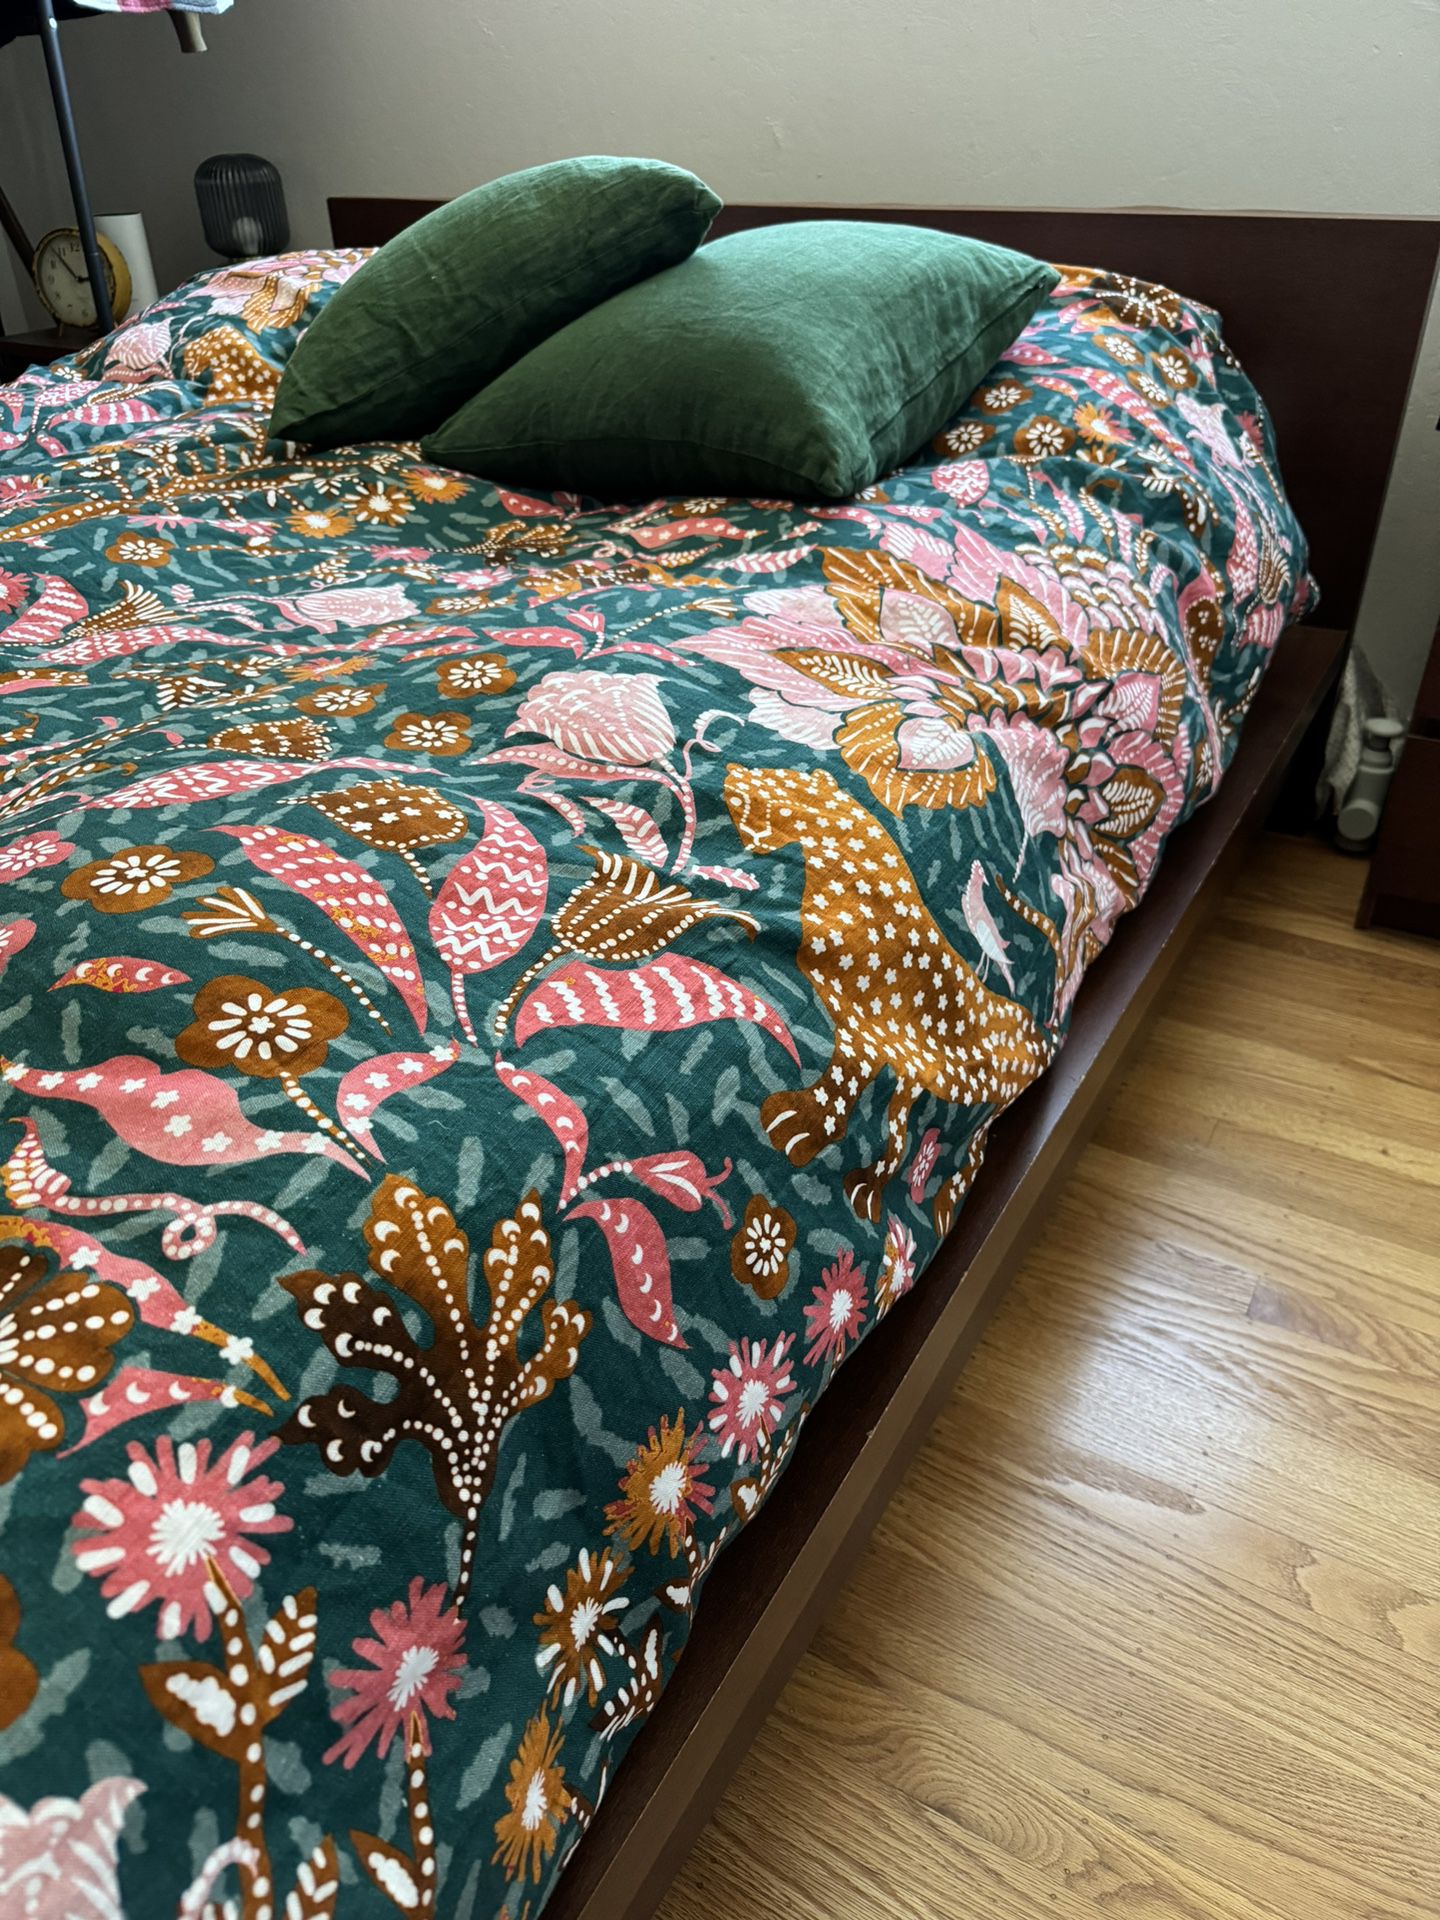 Queen Bed For Free